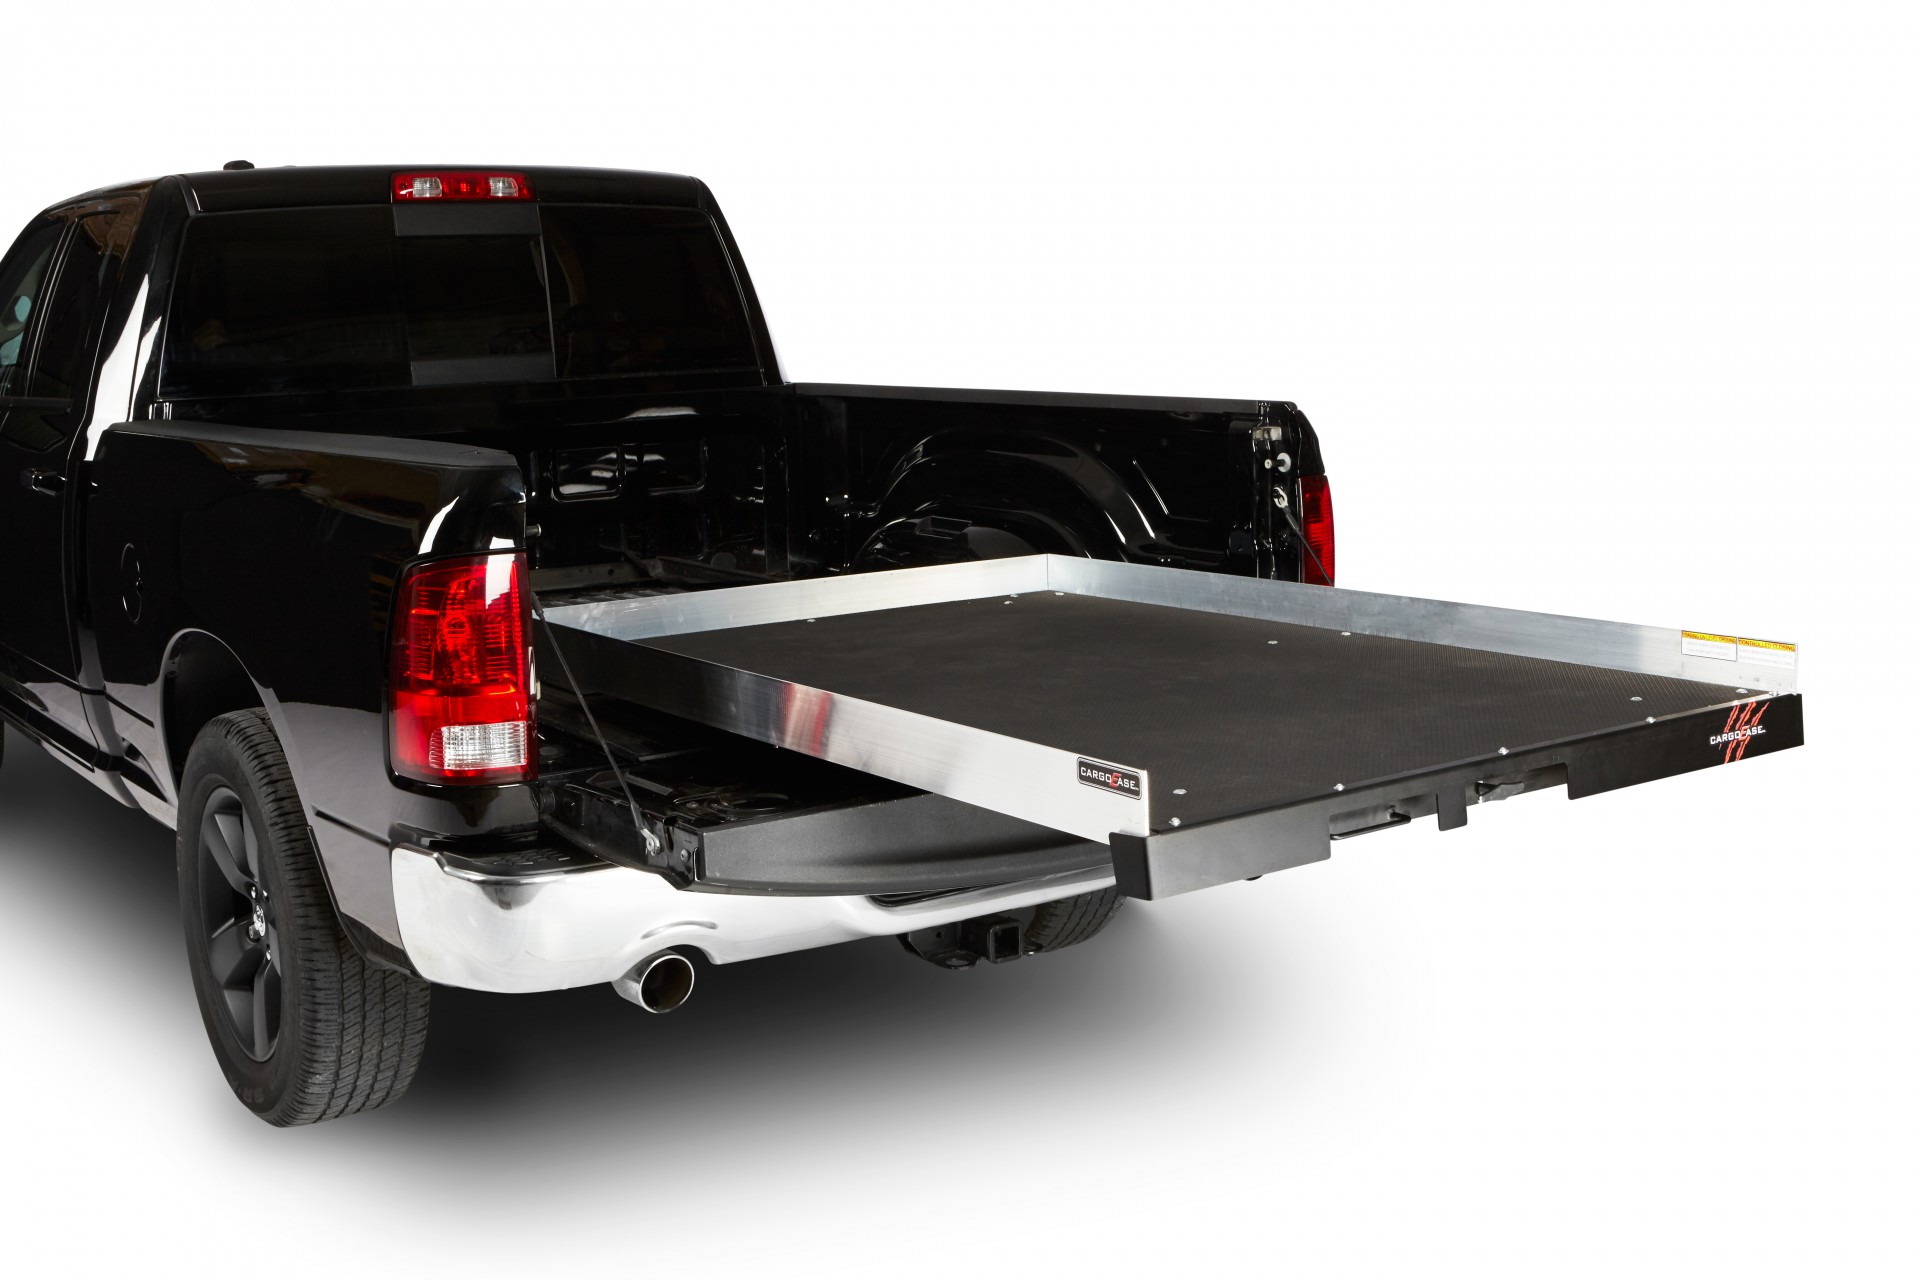 Cargo Ease Full Extension Series Cargo Slide 2000 Lb Capacity 07-Pres Toyota Tundra Crew Max Short Bed